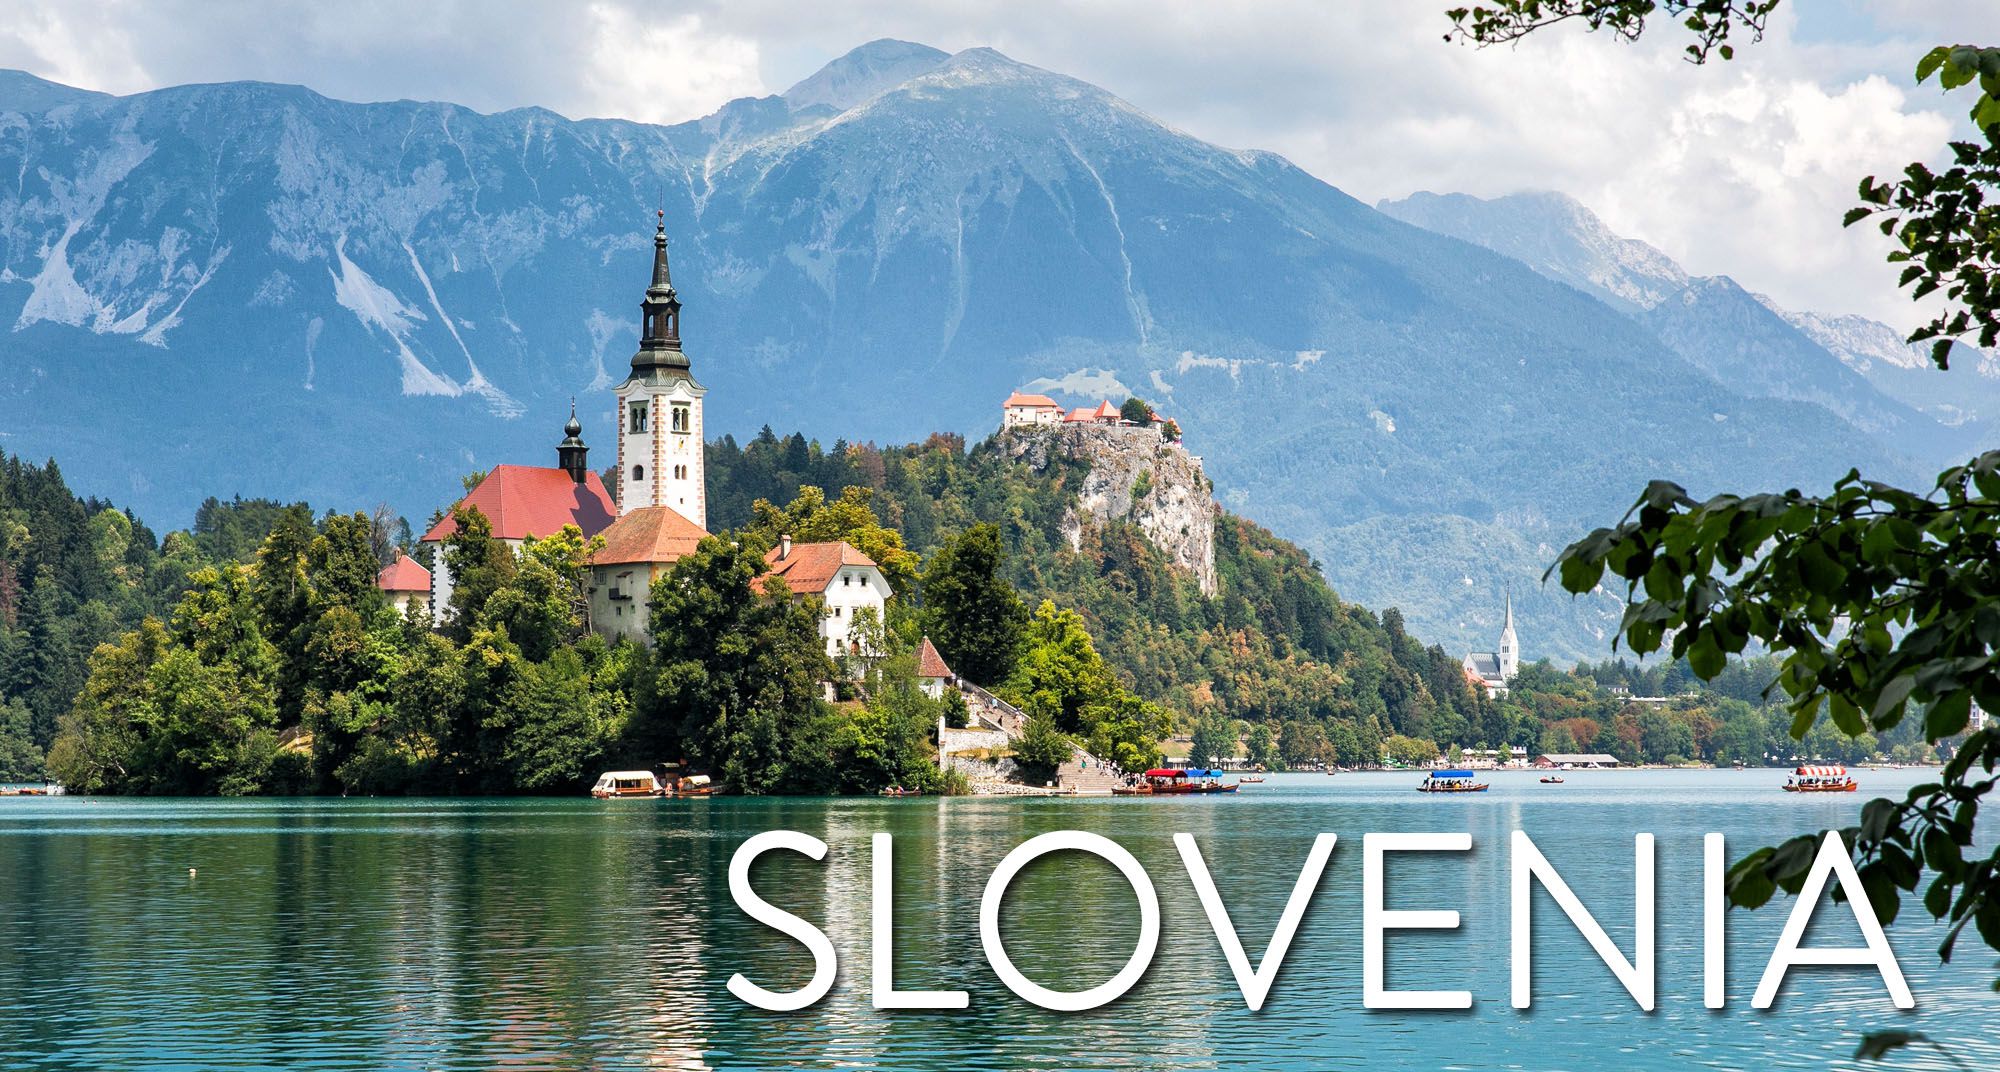 Welcome to Slovenia!  